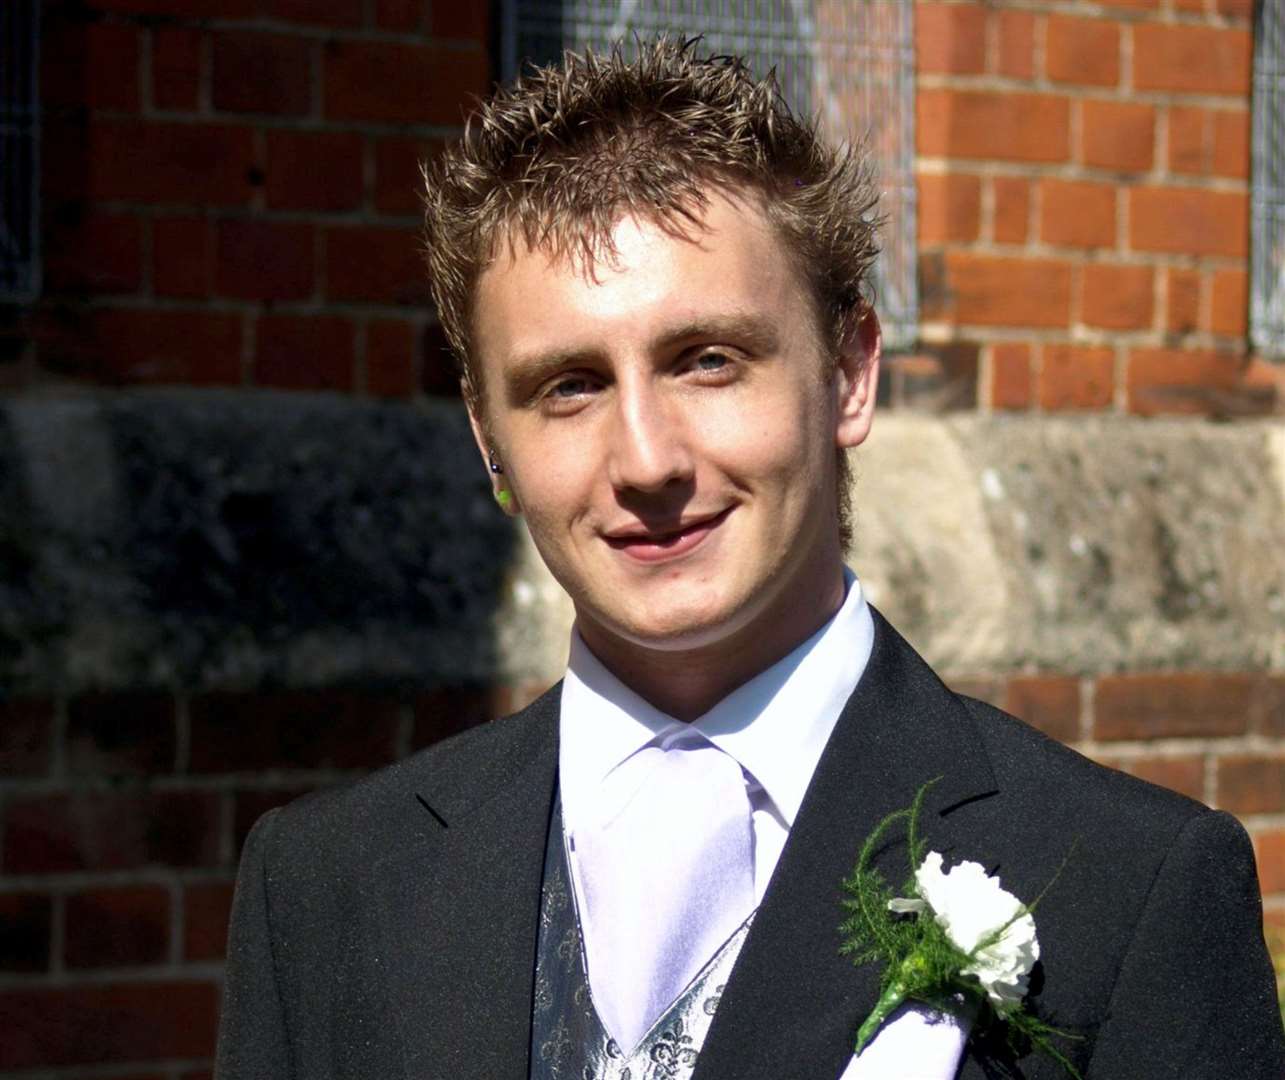 Robert Huckstep, from Margate, suffered a cardiac arrest after struggling with his breathing. Picture: Amanda Healey